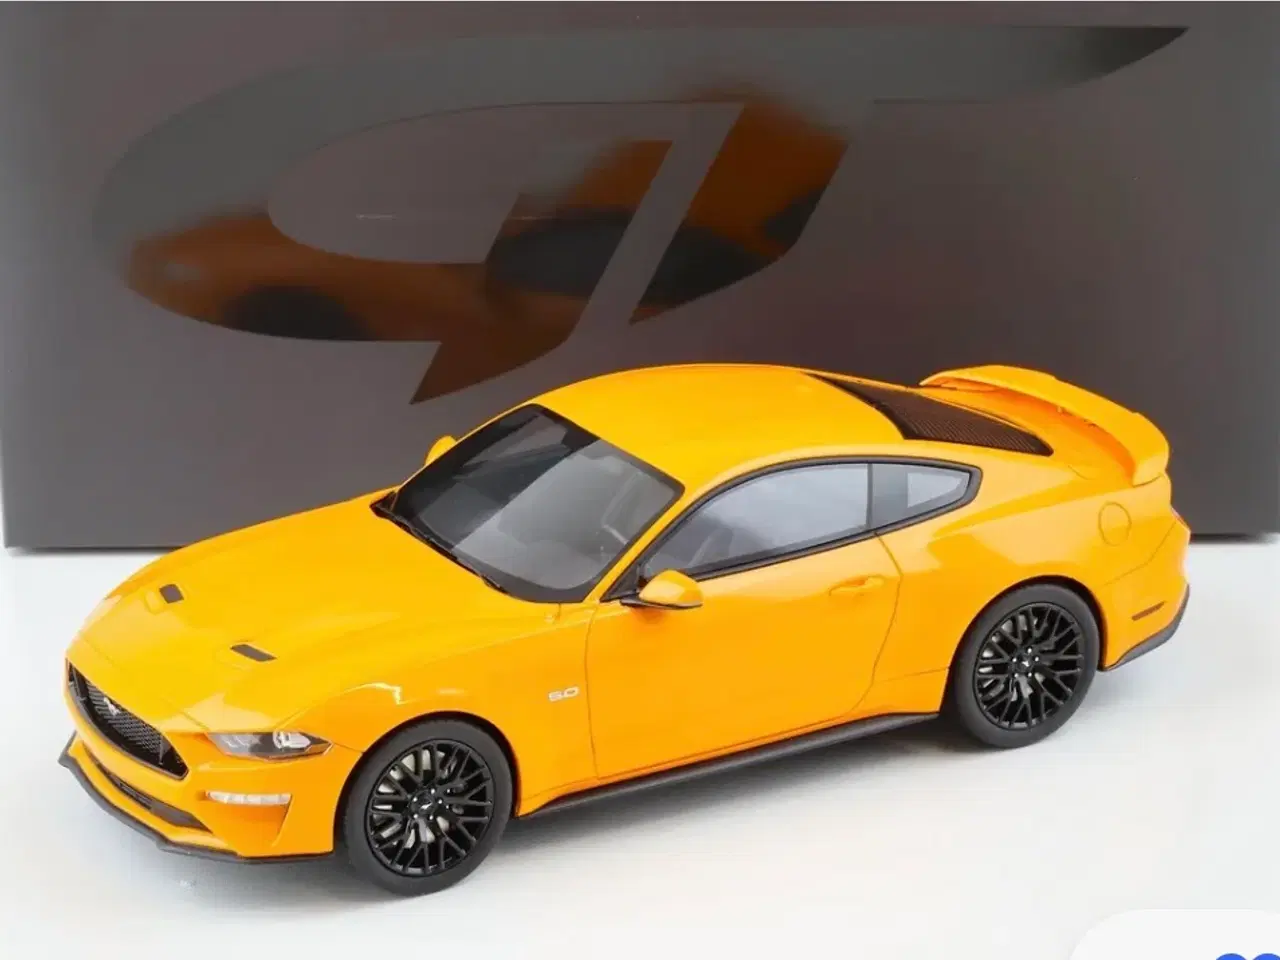 Billede 1 - 1:18 Ford Mustang GT Coupe 2019